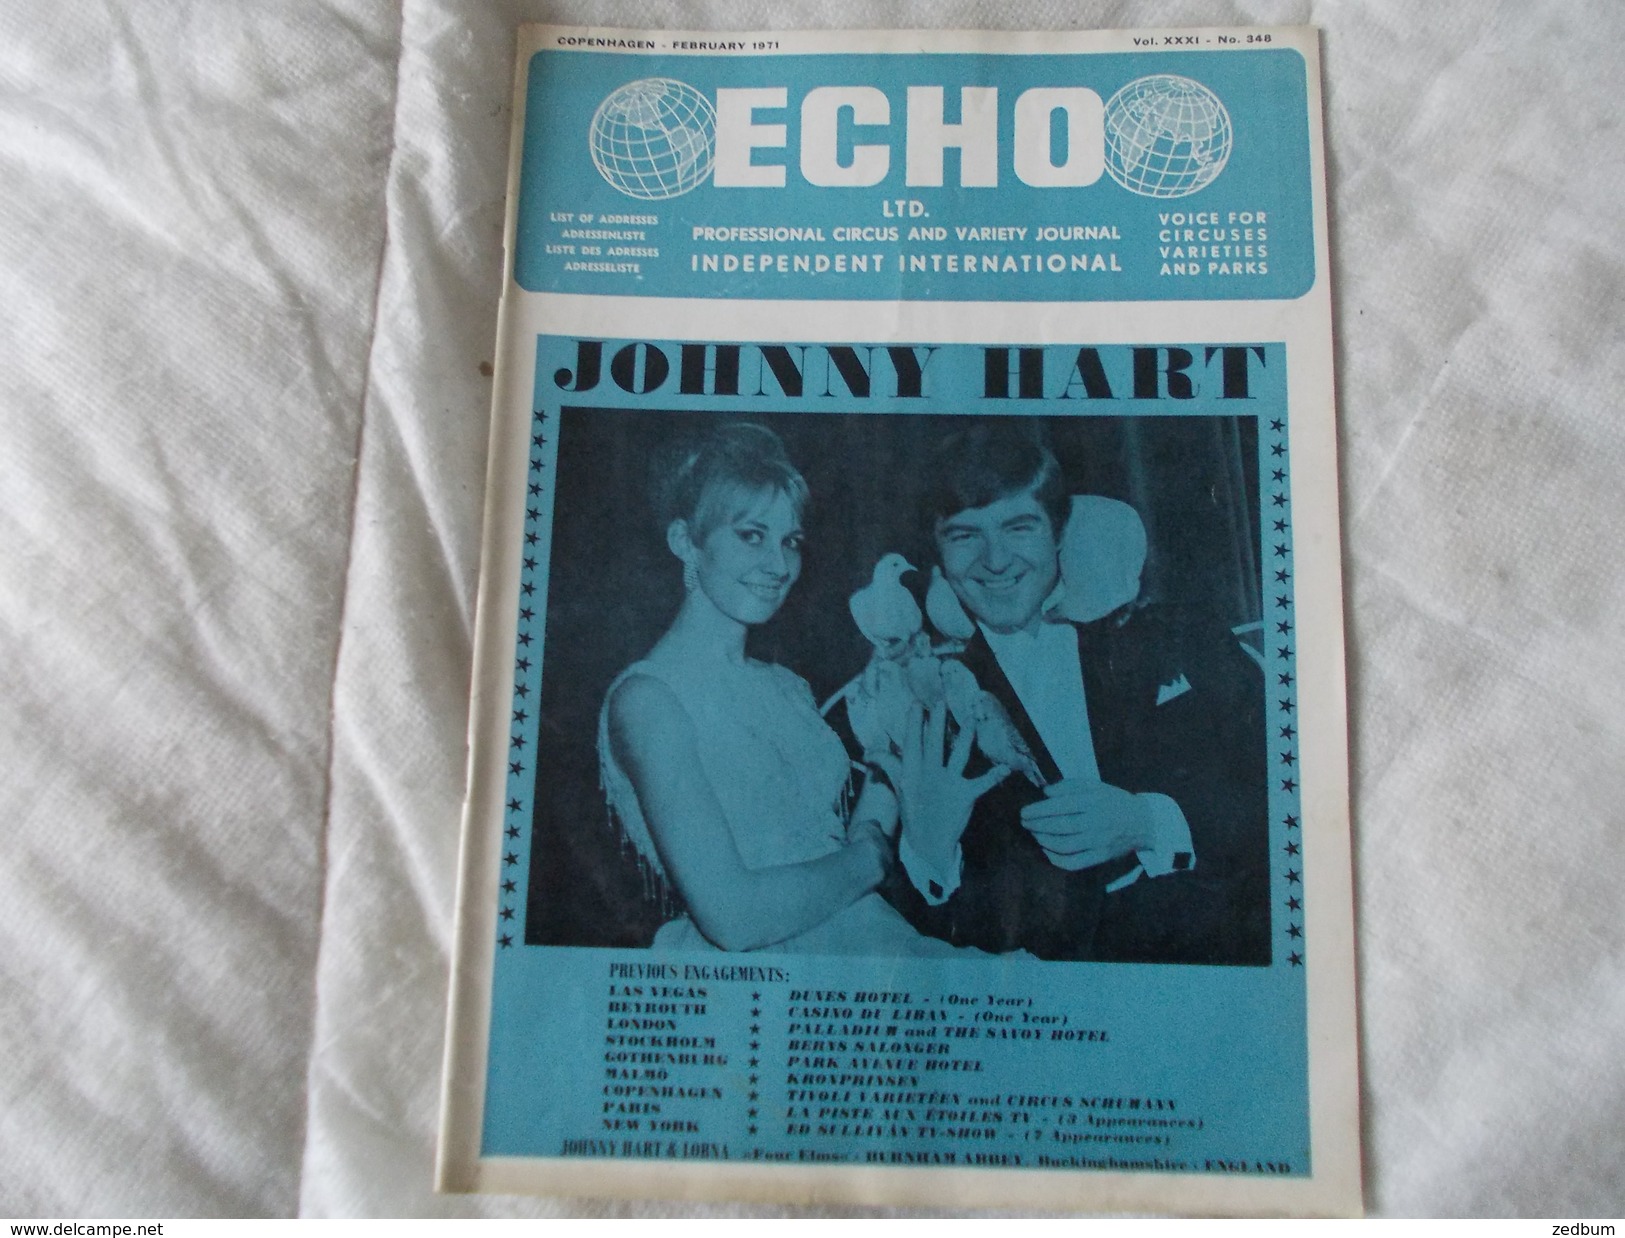 ECHO LTD Professional Circus And Variety Journal Independent International N° 348 February 1971 - Divertimento